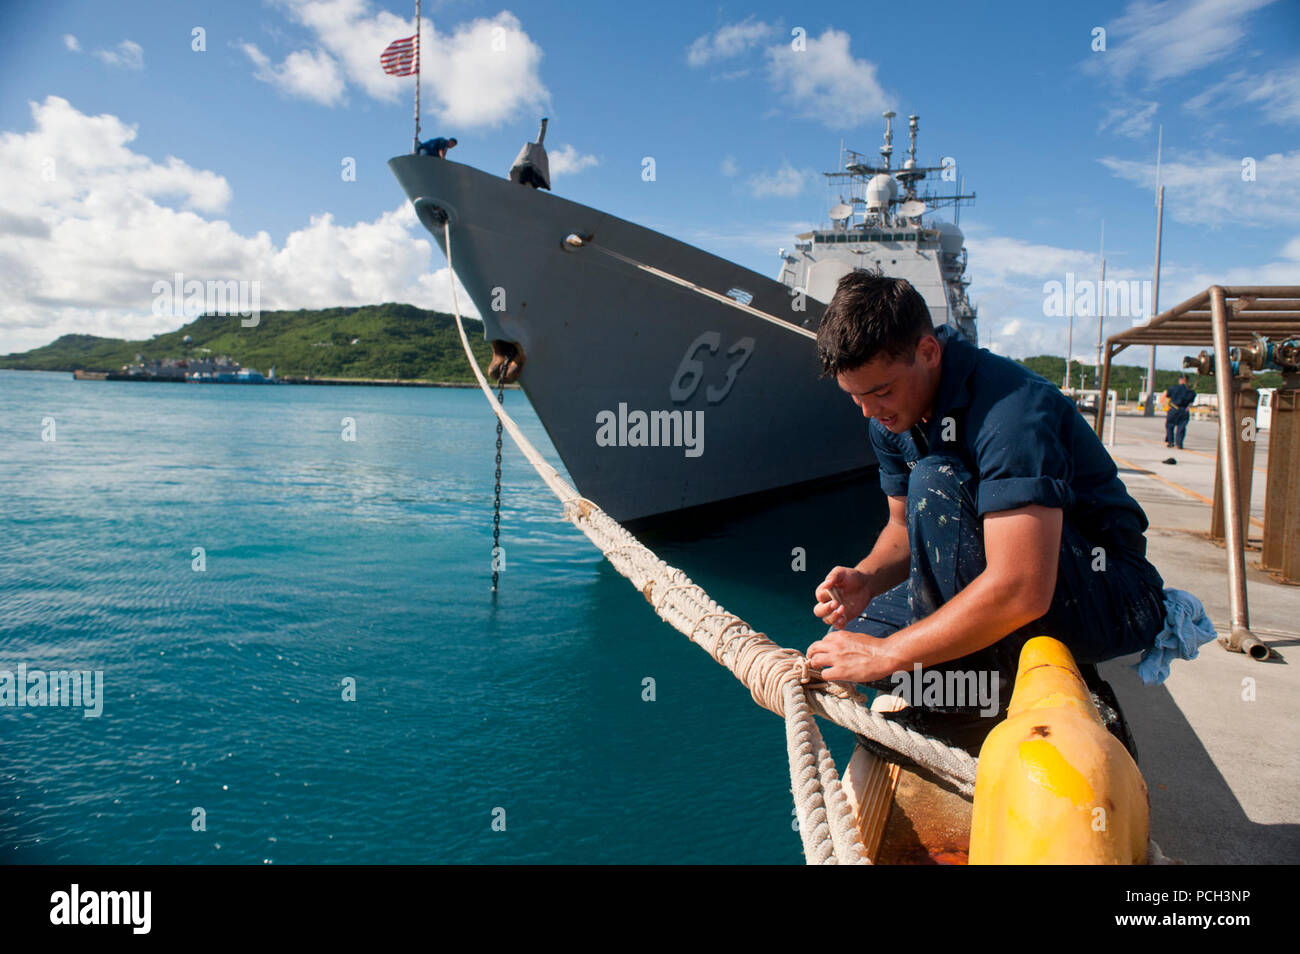 OKINAWA, Japan (July 23, 2012) Seaman Recruit James McGrath wraps the mooring lines of the Ticonderoga-class guided-missile cruiser USS Cowpens (CG 63) shortly after the ship moored pier-side. Cowpens is forward-deployed to Yokosuka, Japan and is operating in the U.S. 7th Fleet area of responsibility. Stock Photo